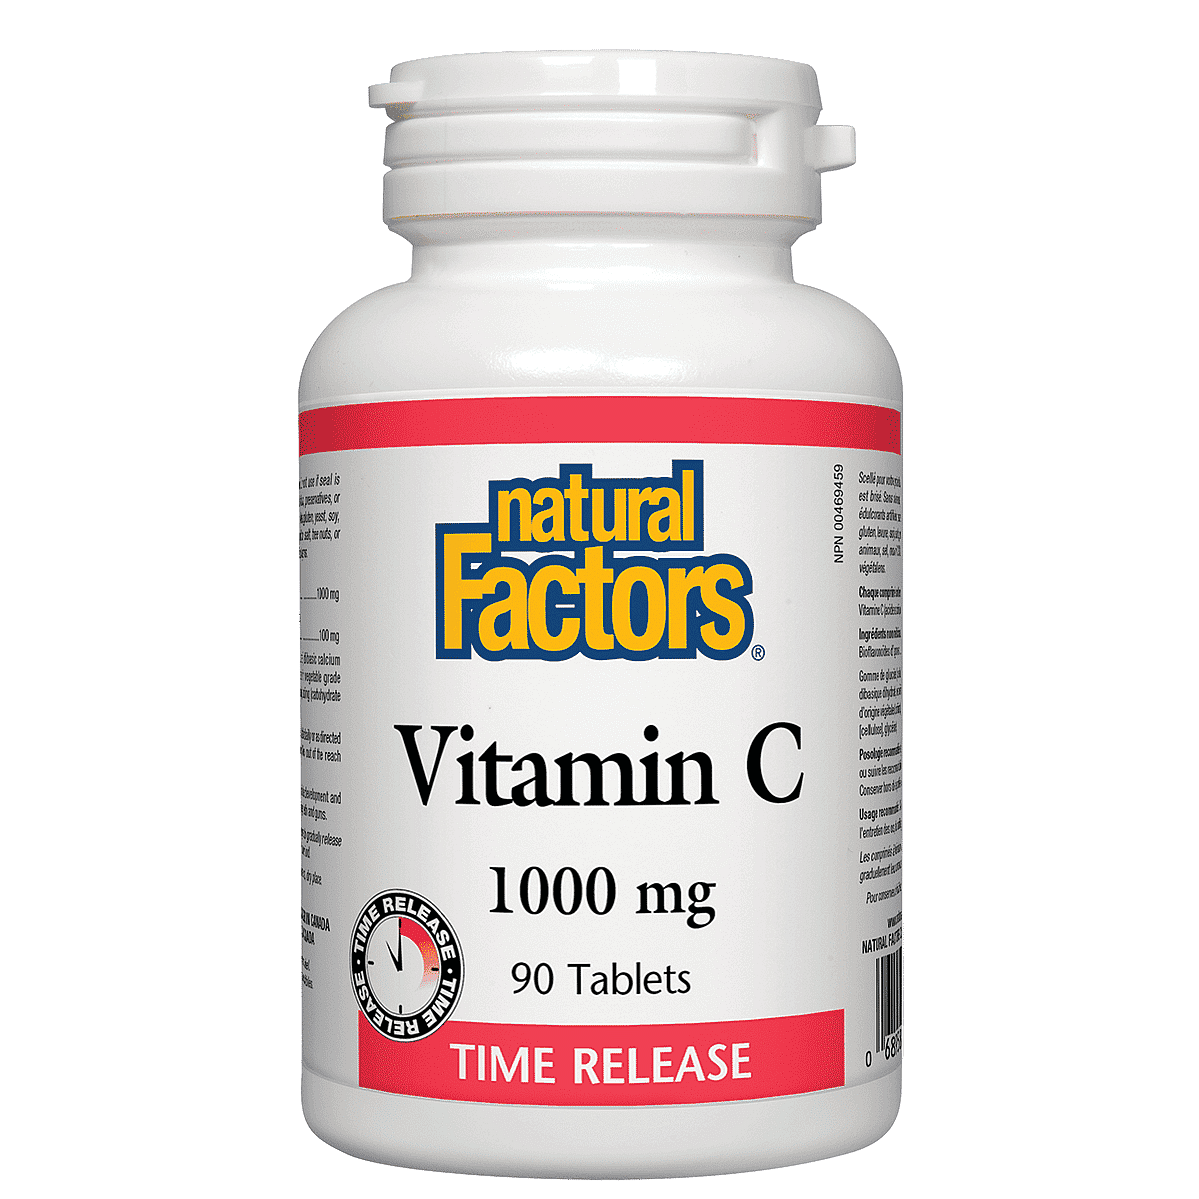 Natural Factors Vitamin C 1000 mg Time Release, 90 Tablets